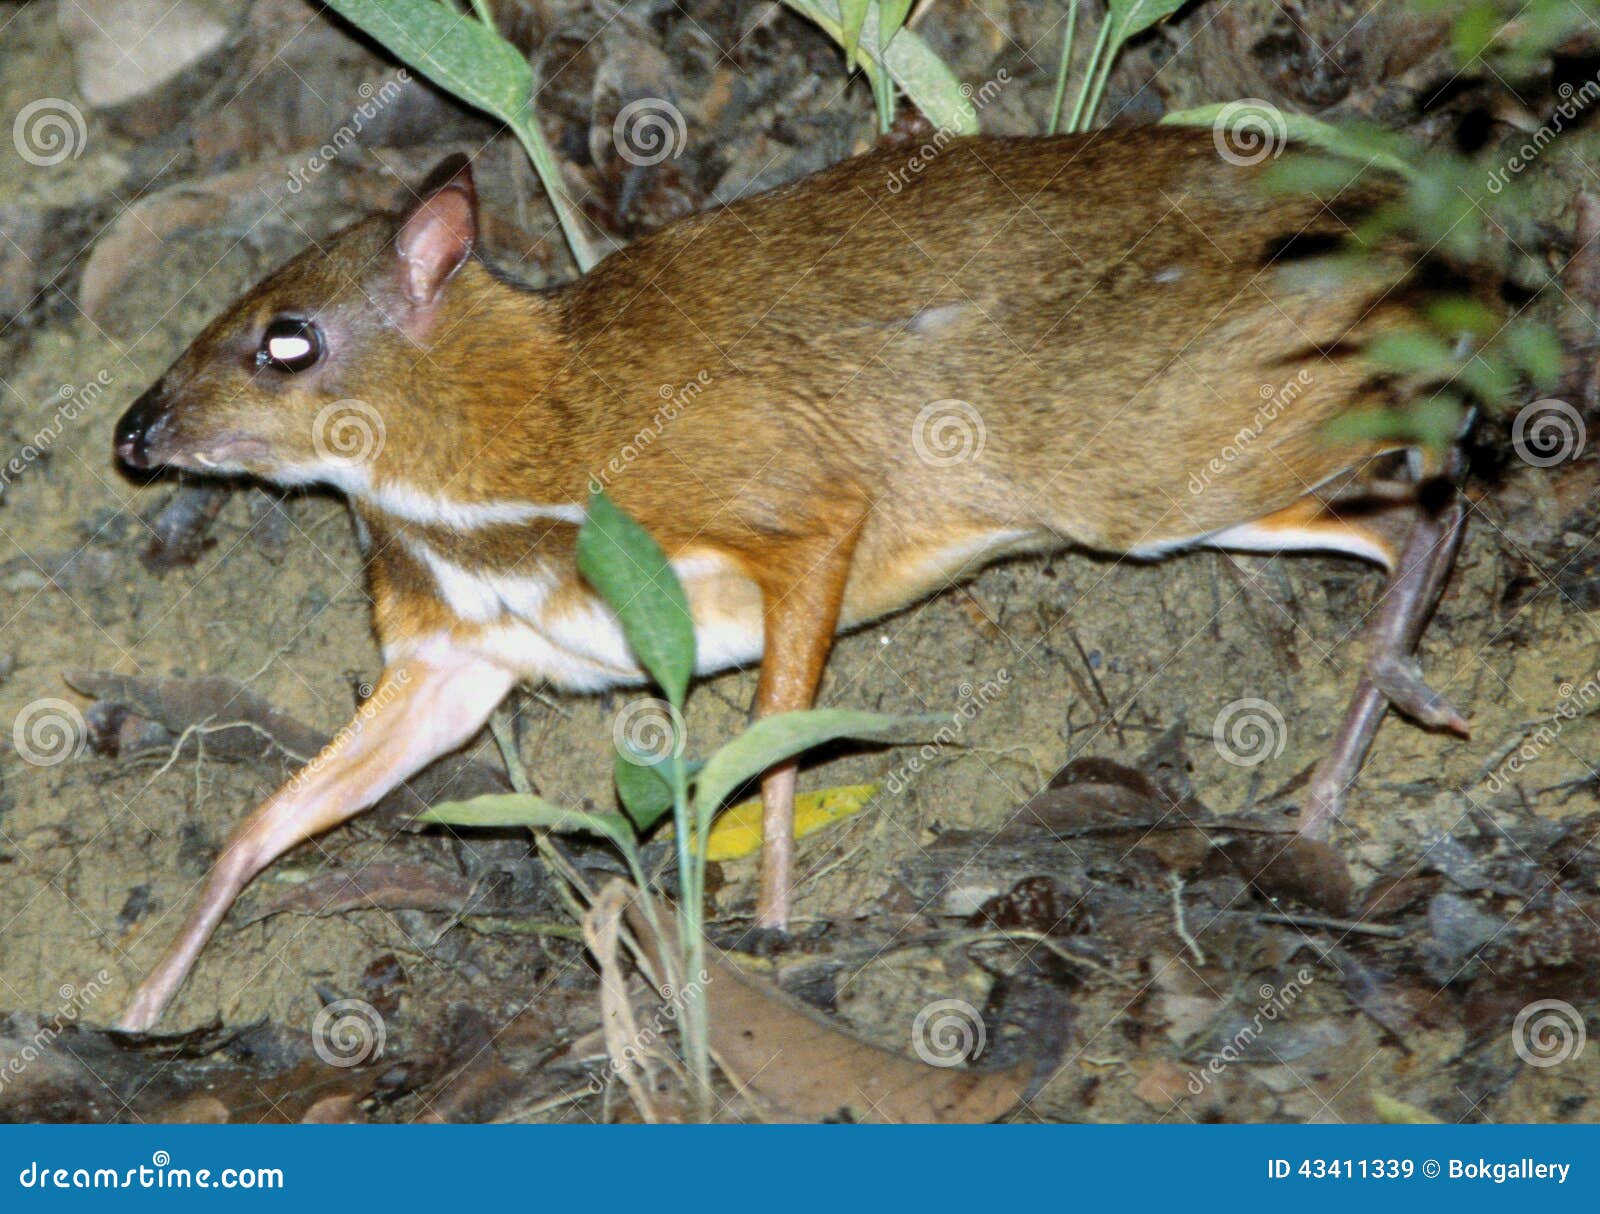 mouse deer, the smallest deer in the world